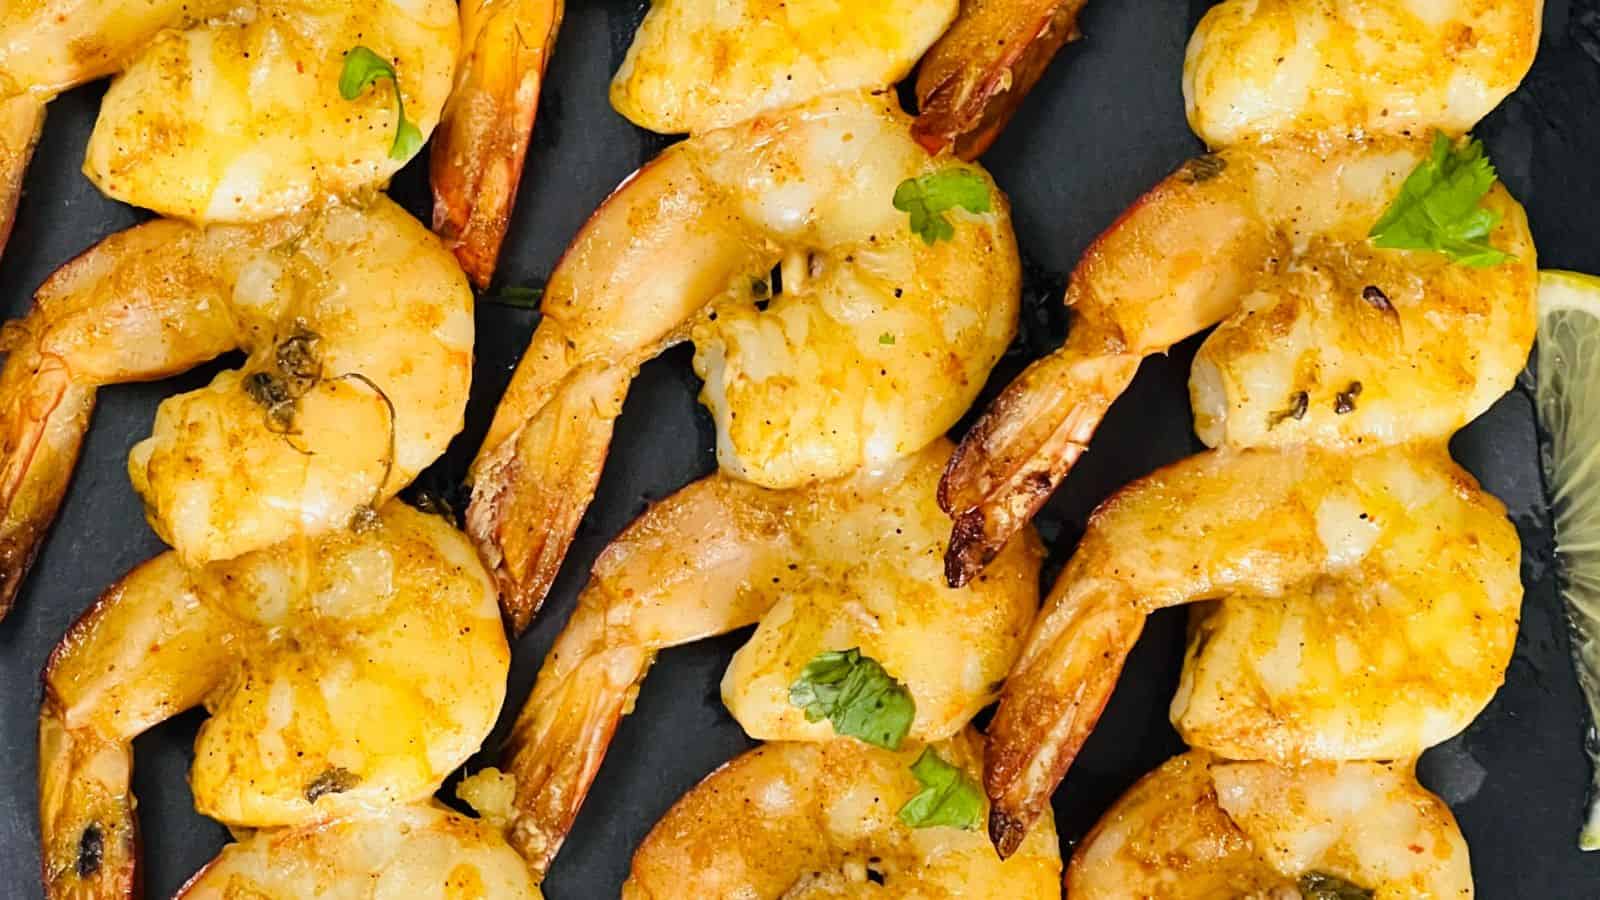 Grilled shrimp skewers seasoned with spices and garnished with fresh herbs, served on a dark plate.